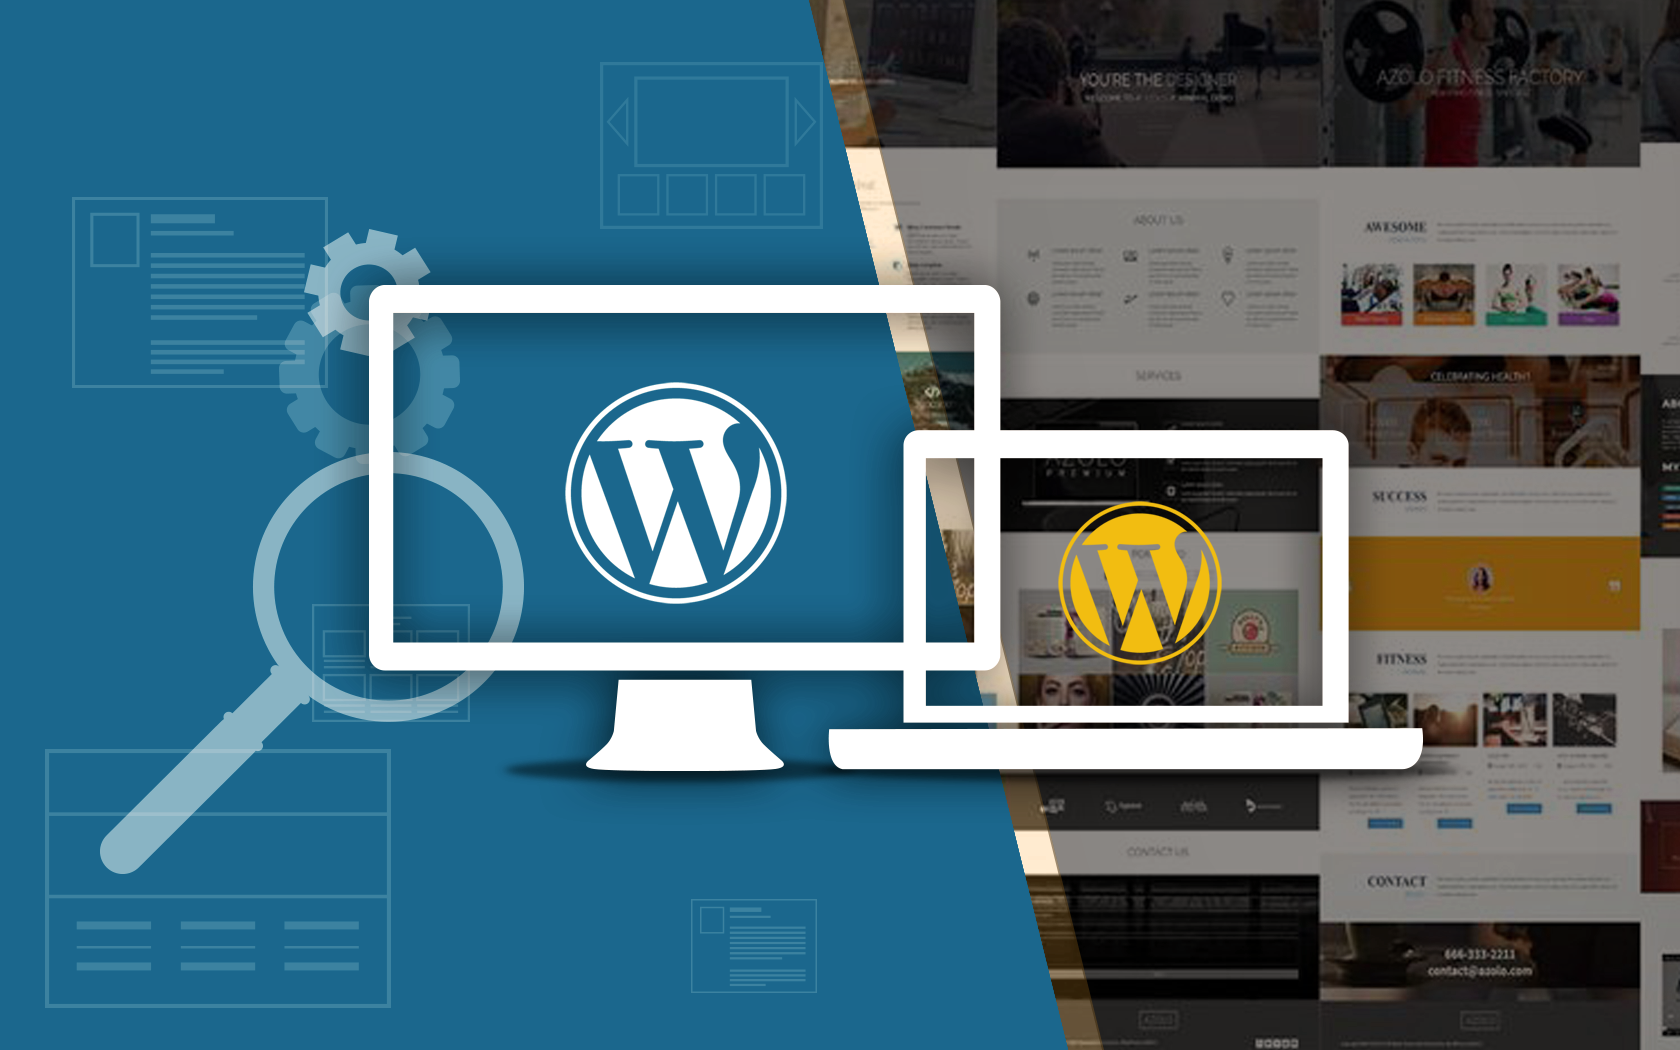 Top-10-plugins-which-every-WordPress-website-must-have-in-2015.png?x94435